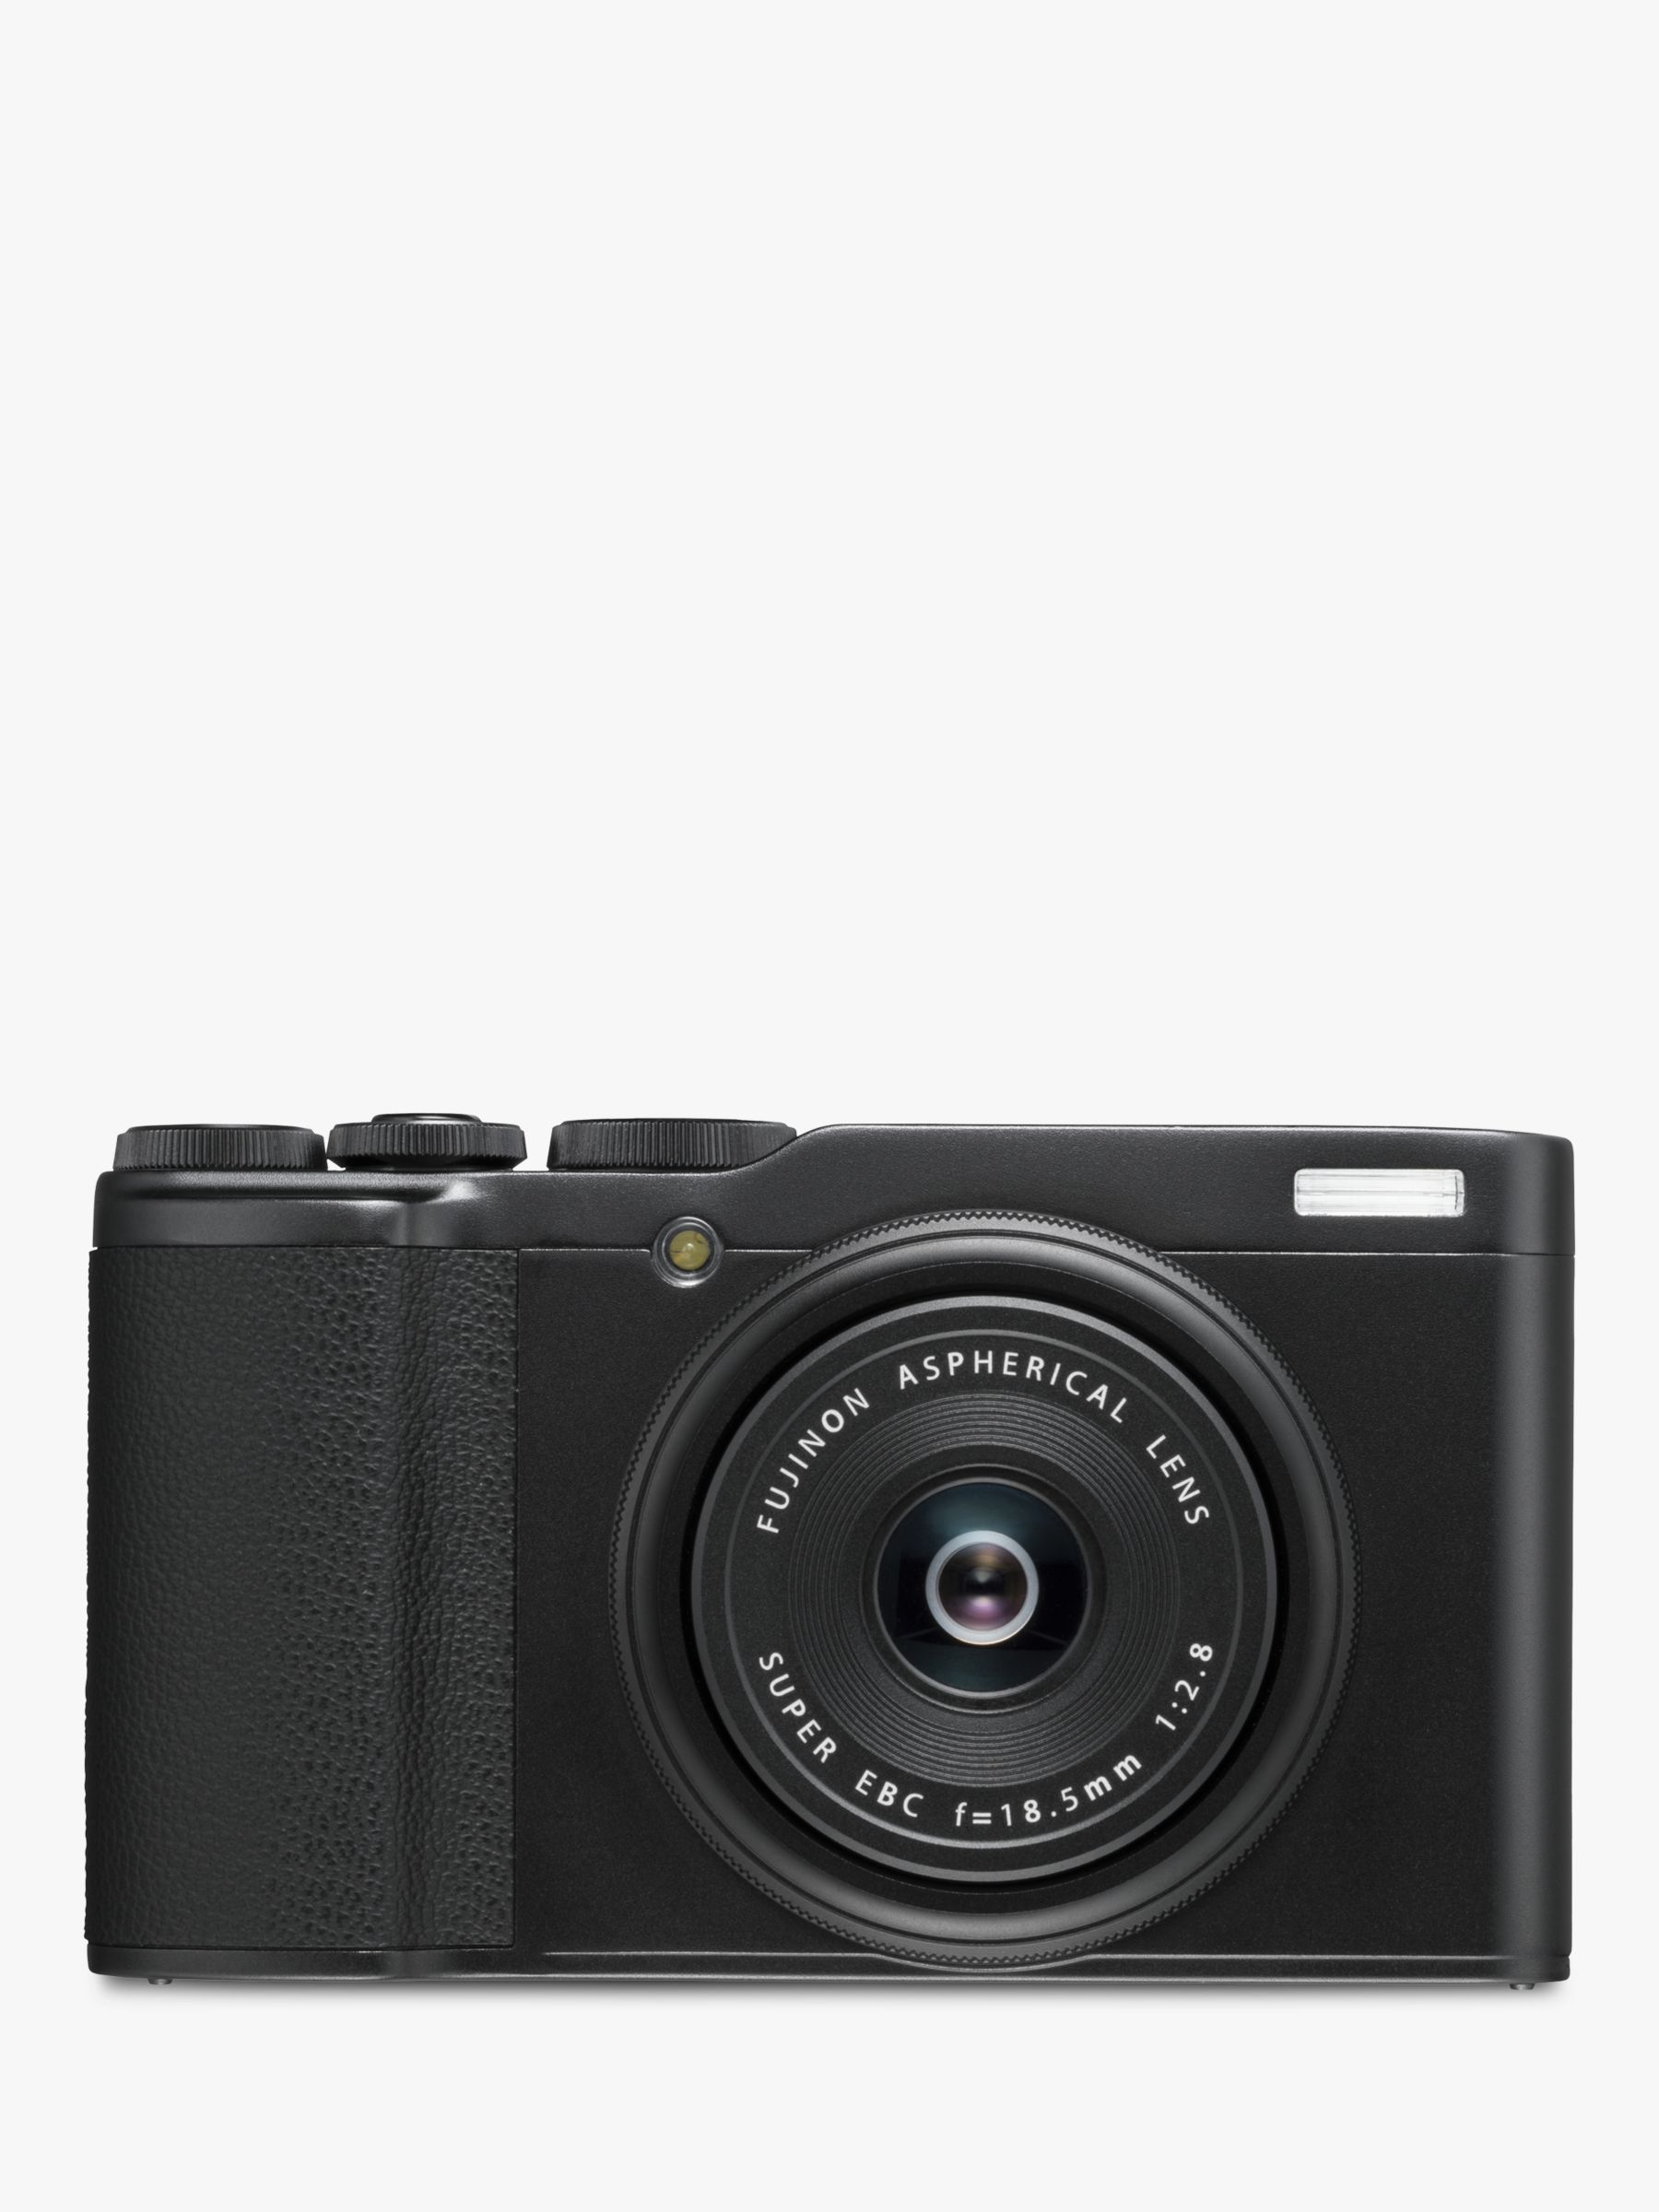 Fujifilm XF10 Digital Compact Camera with 18.5mm Wide Angle Lens, 4K UHD, 24.2MP, Wi-Fi, Bluetooth, 3 LCD Touch Screen